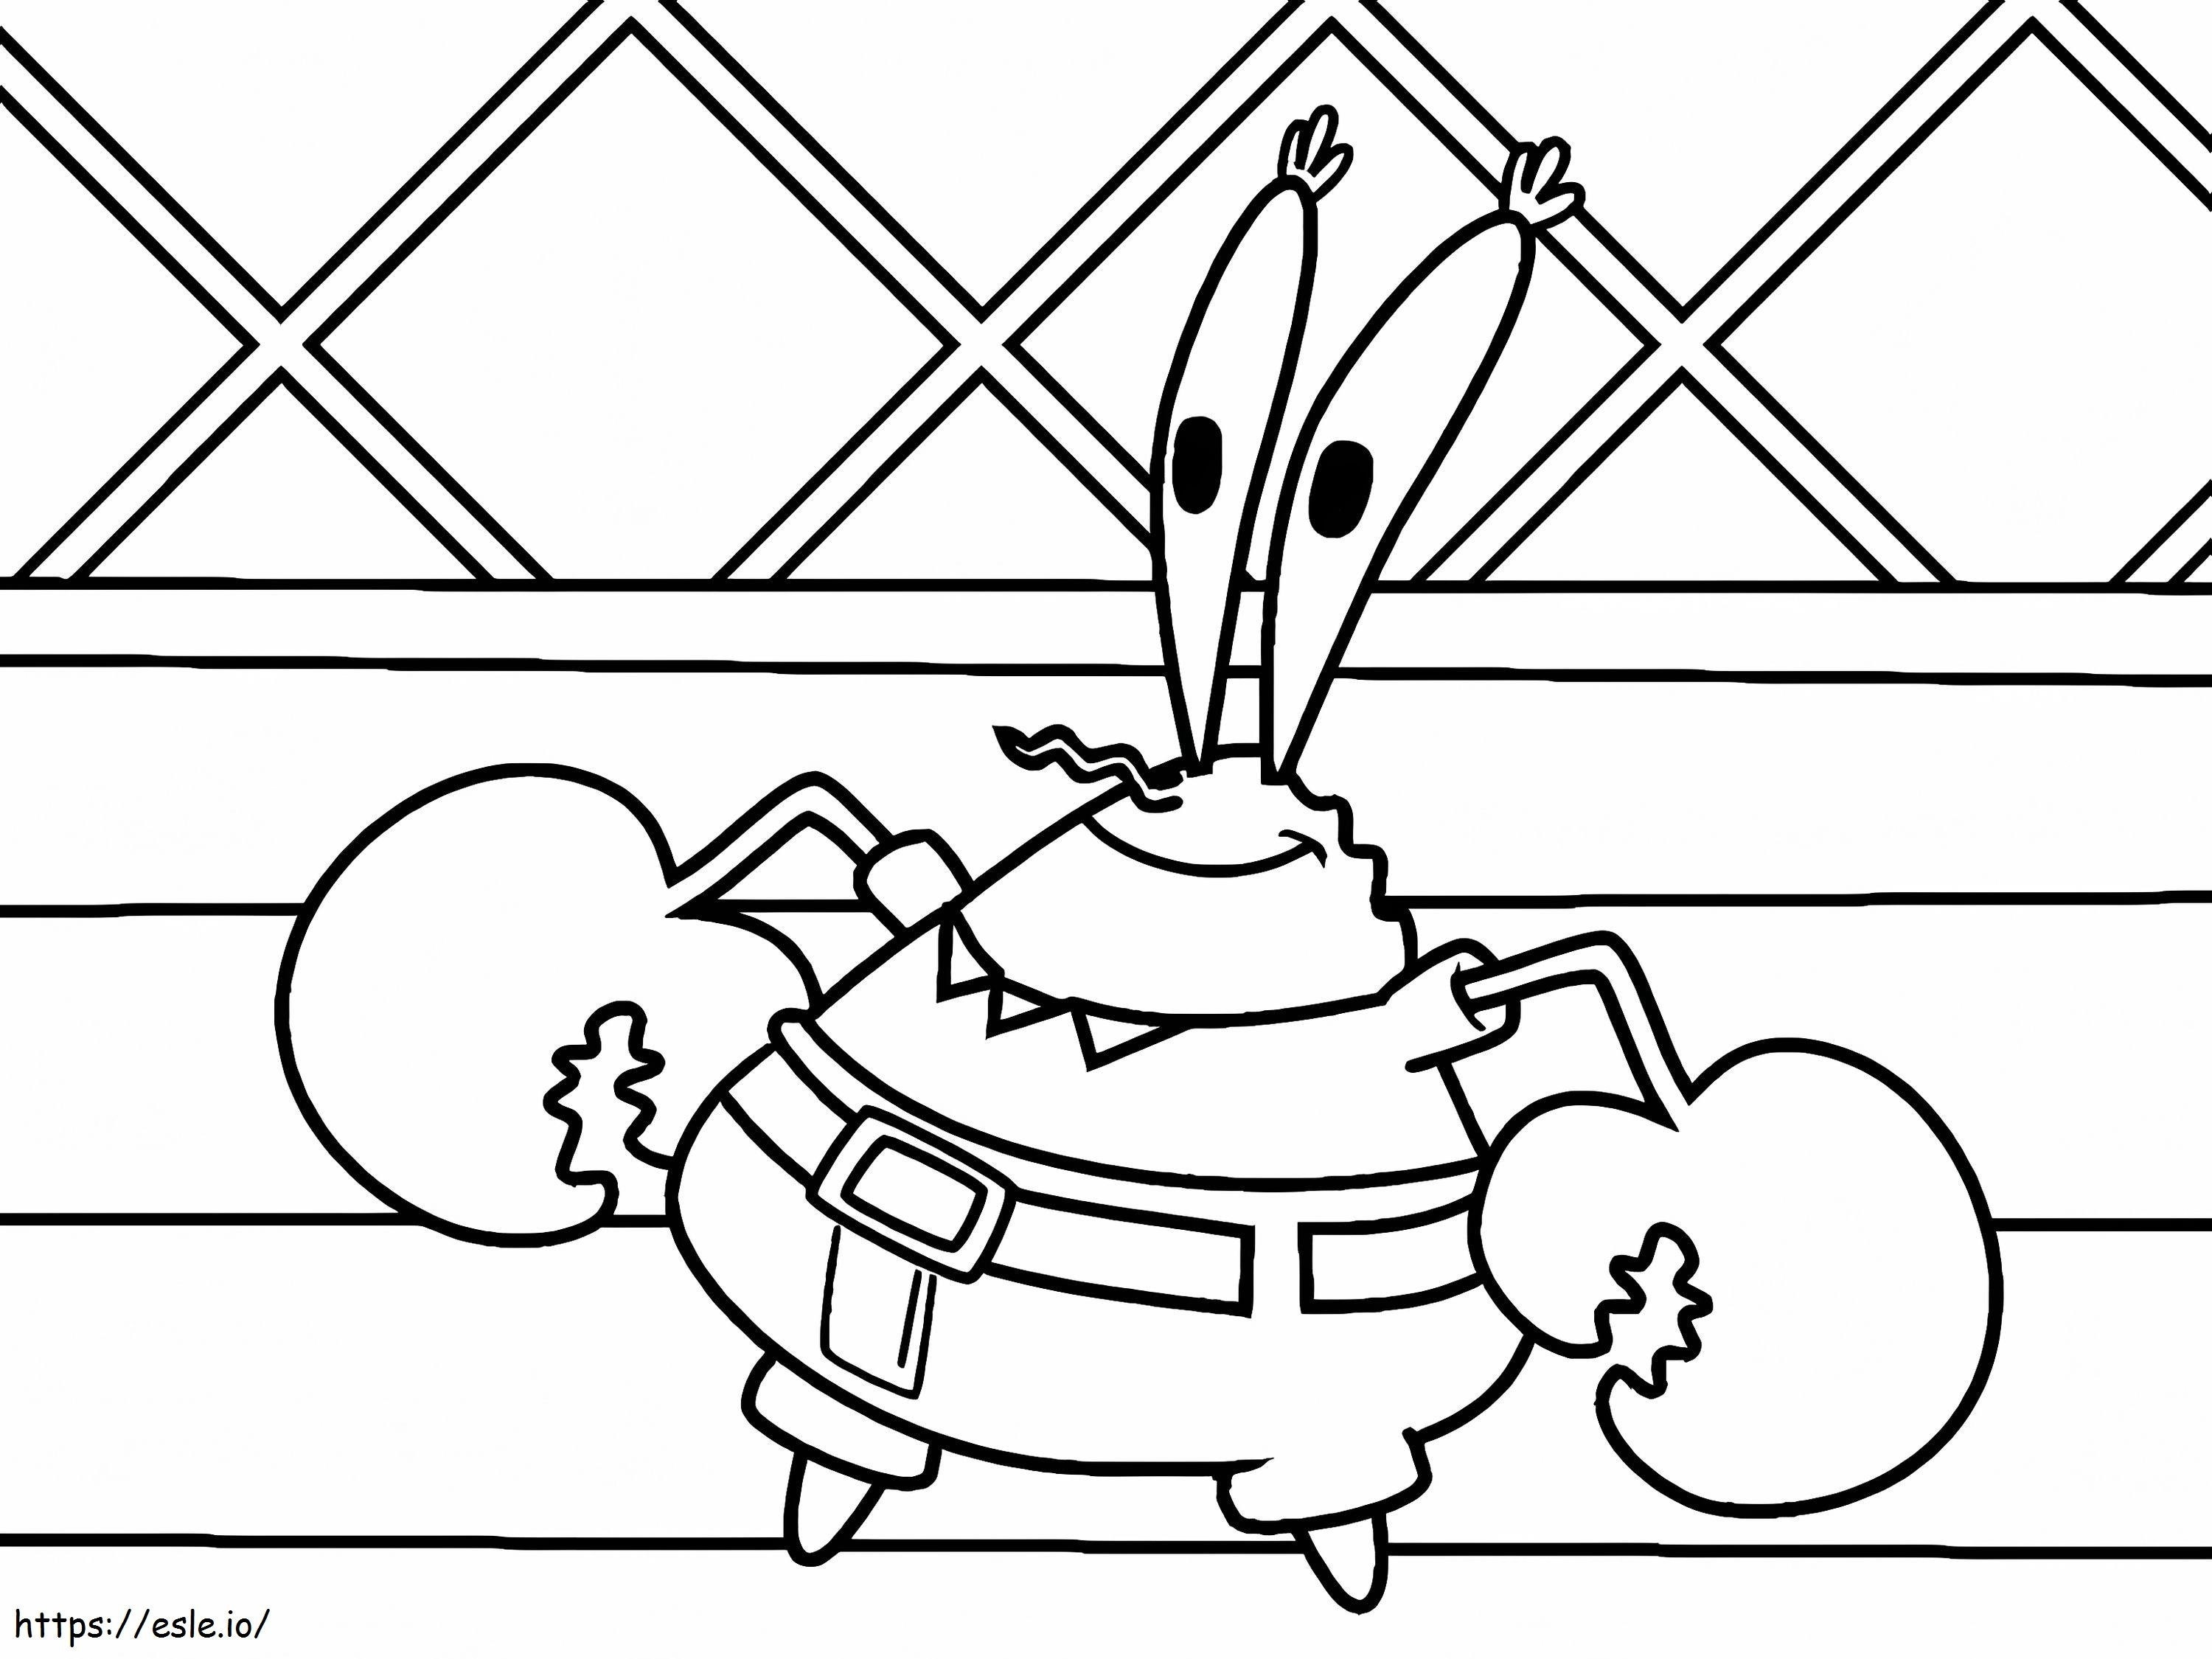 Good Mr. Krabs coloring page